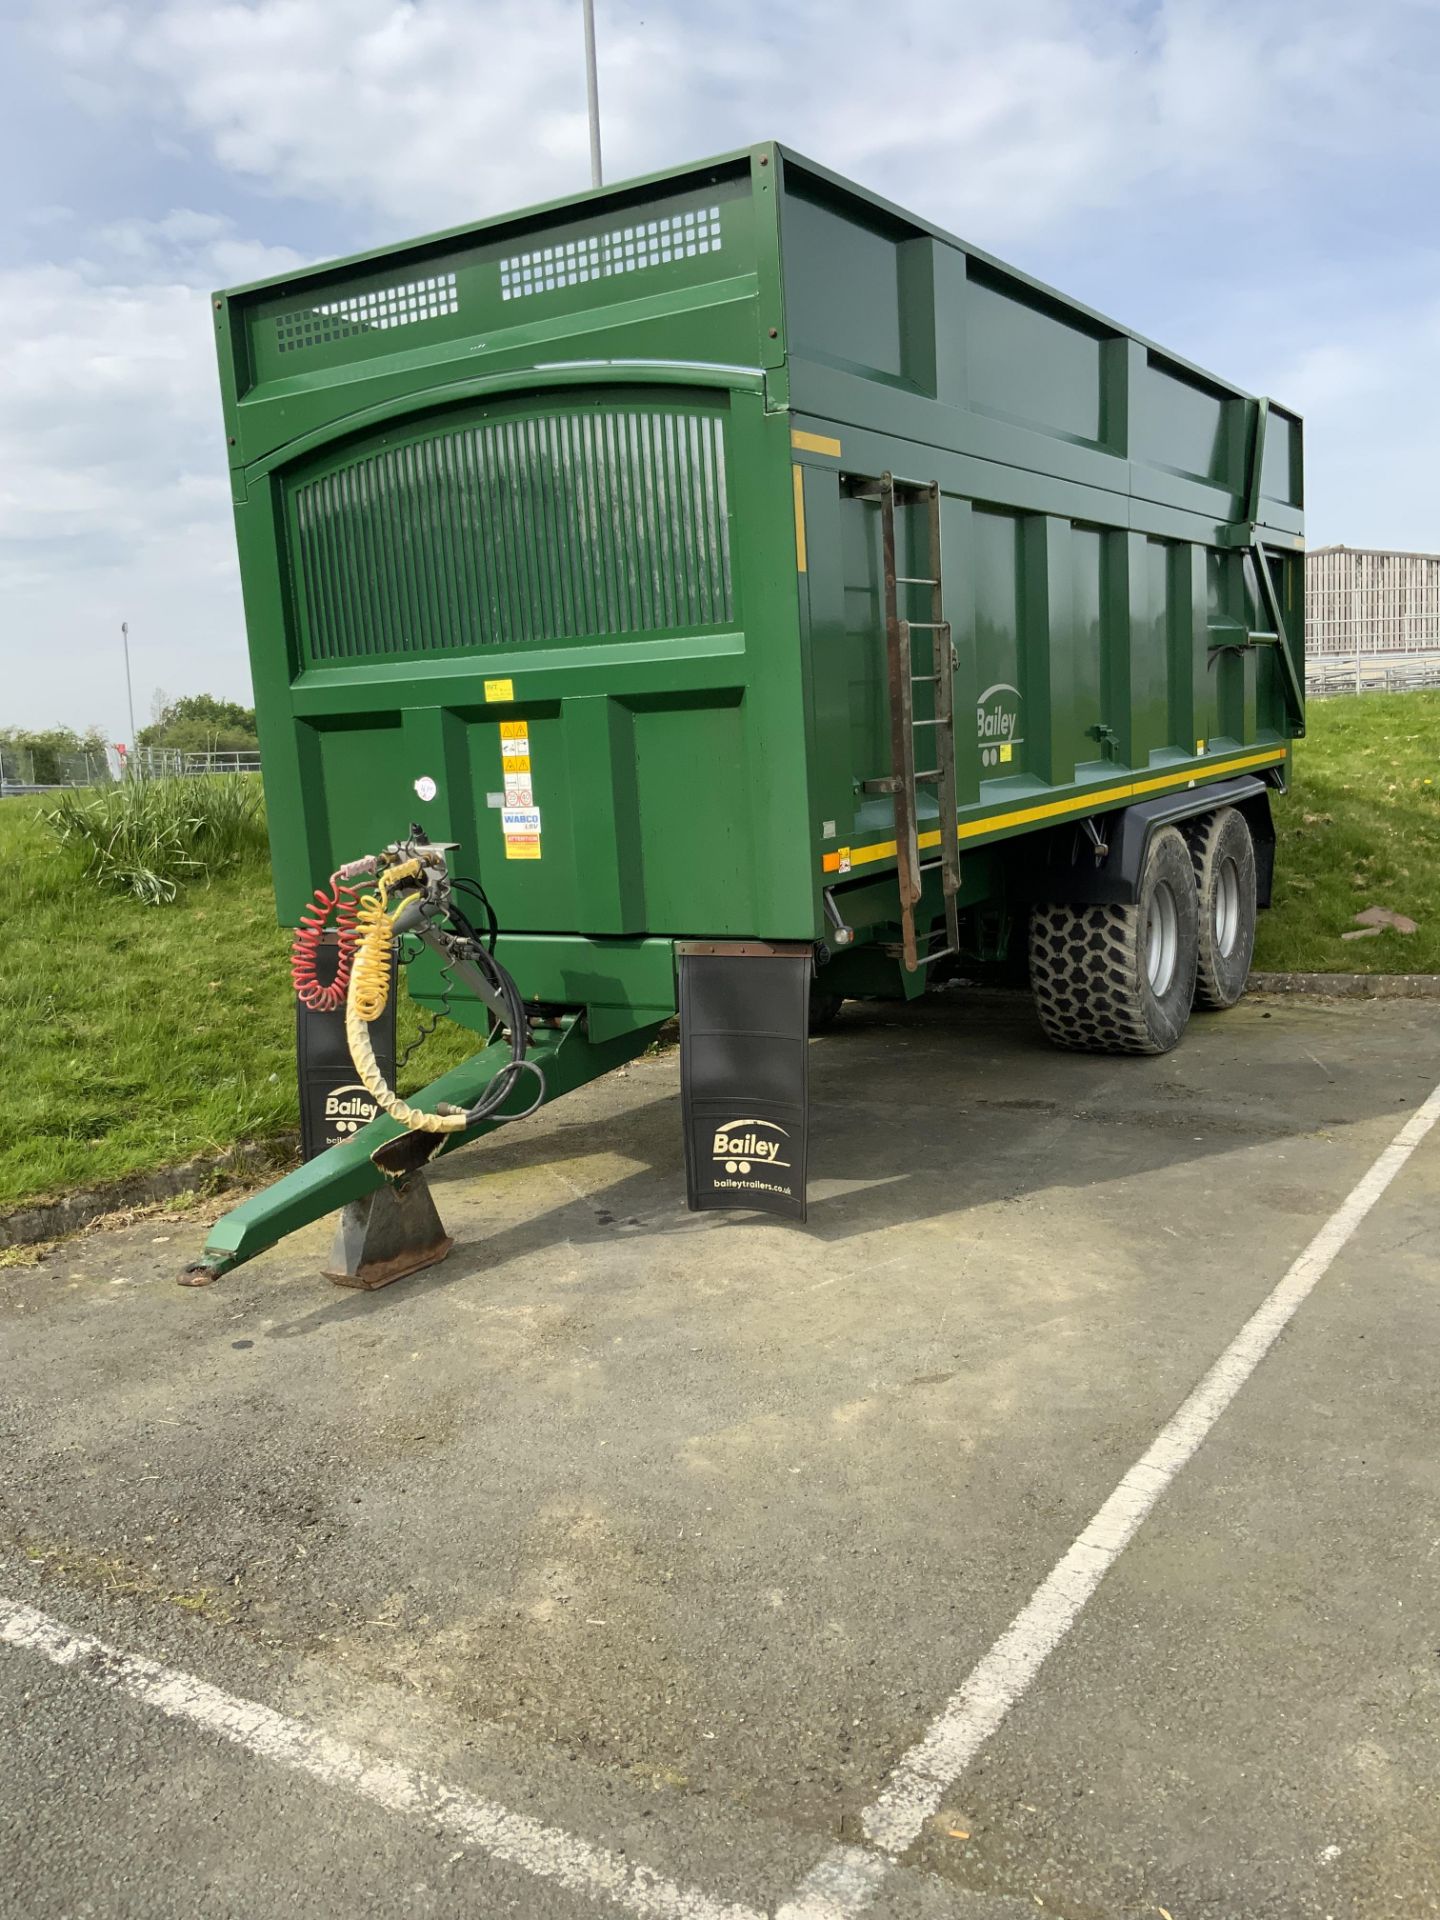 2019 BAILEY 16 TON SILAGE TRAILER - Image 2 of 4